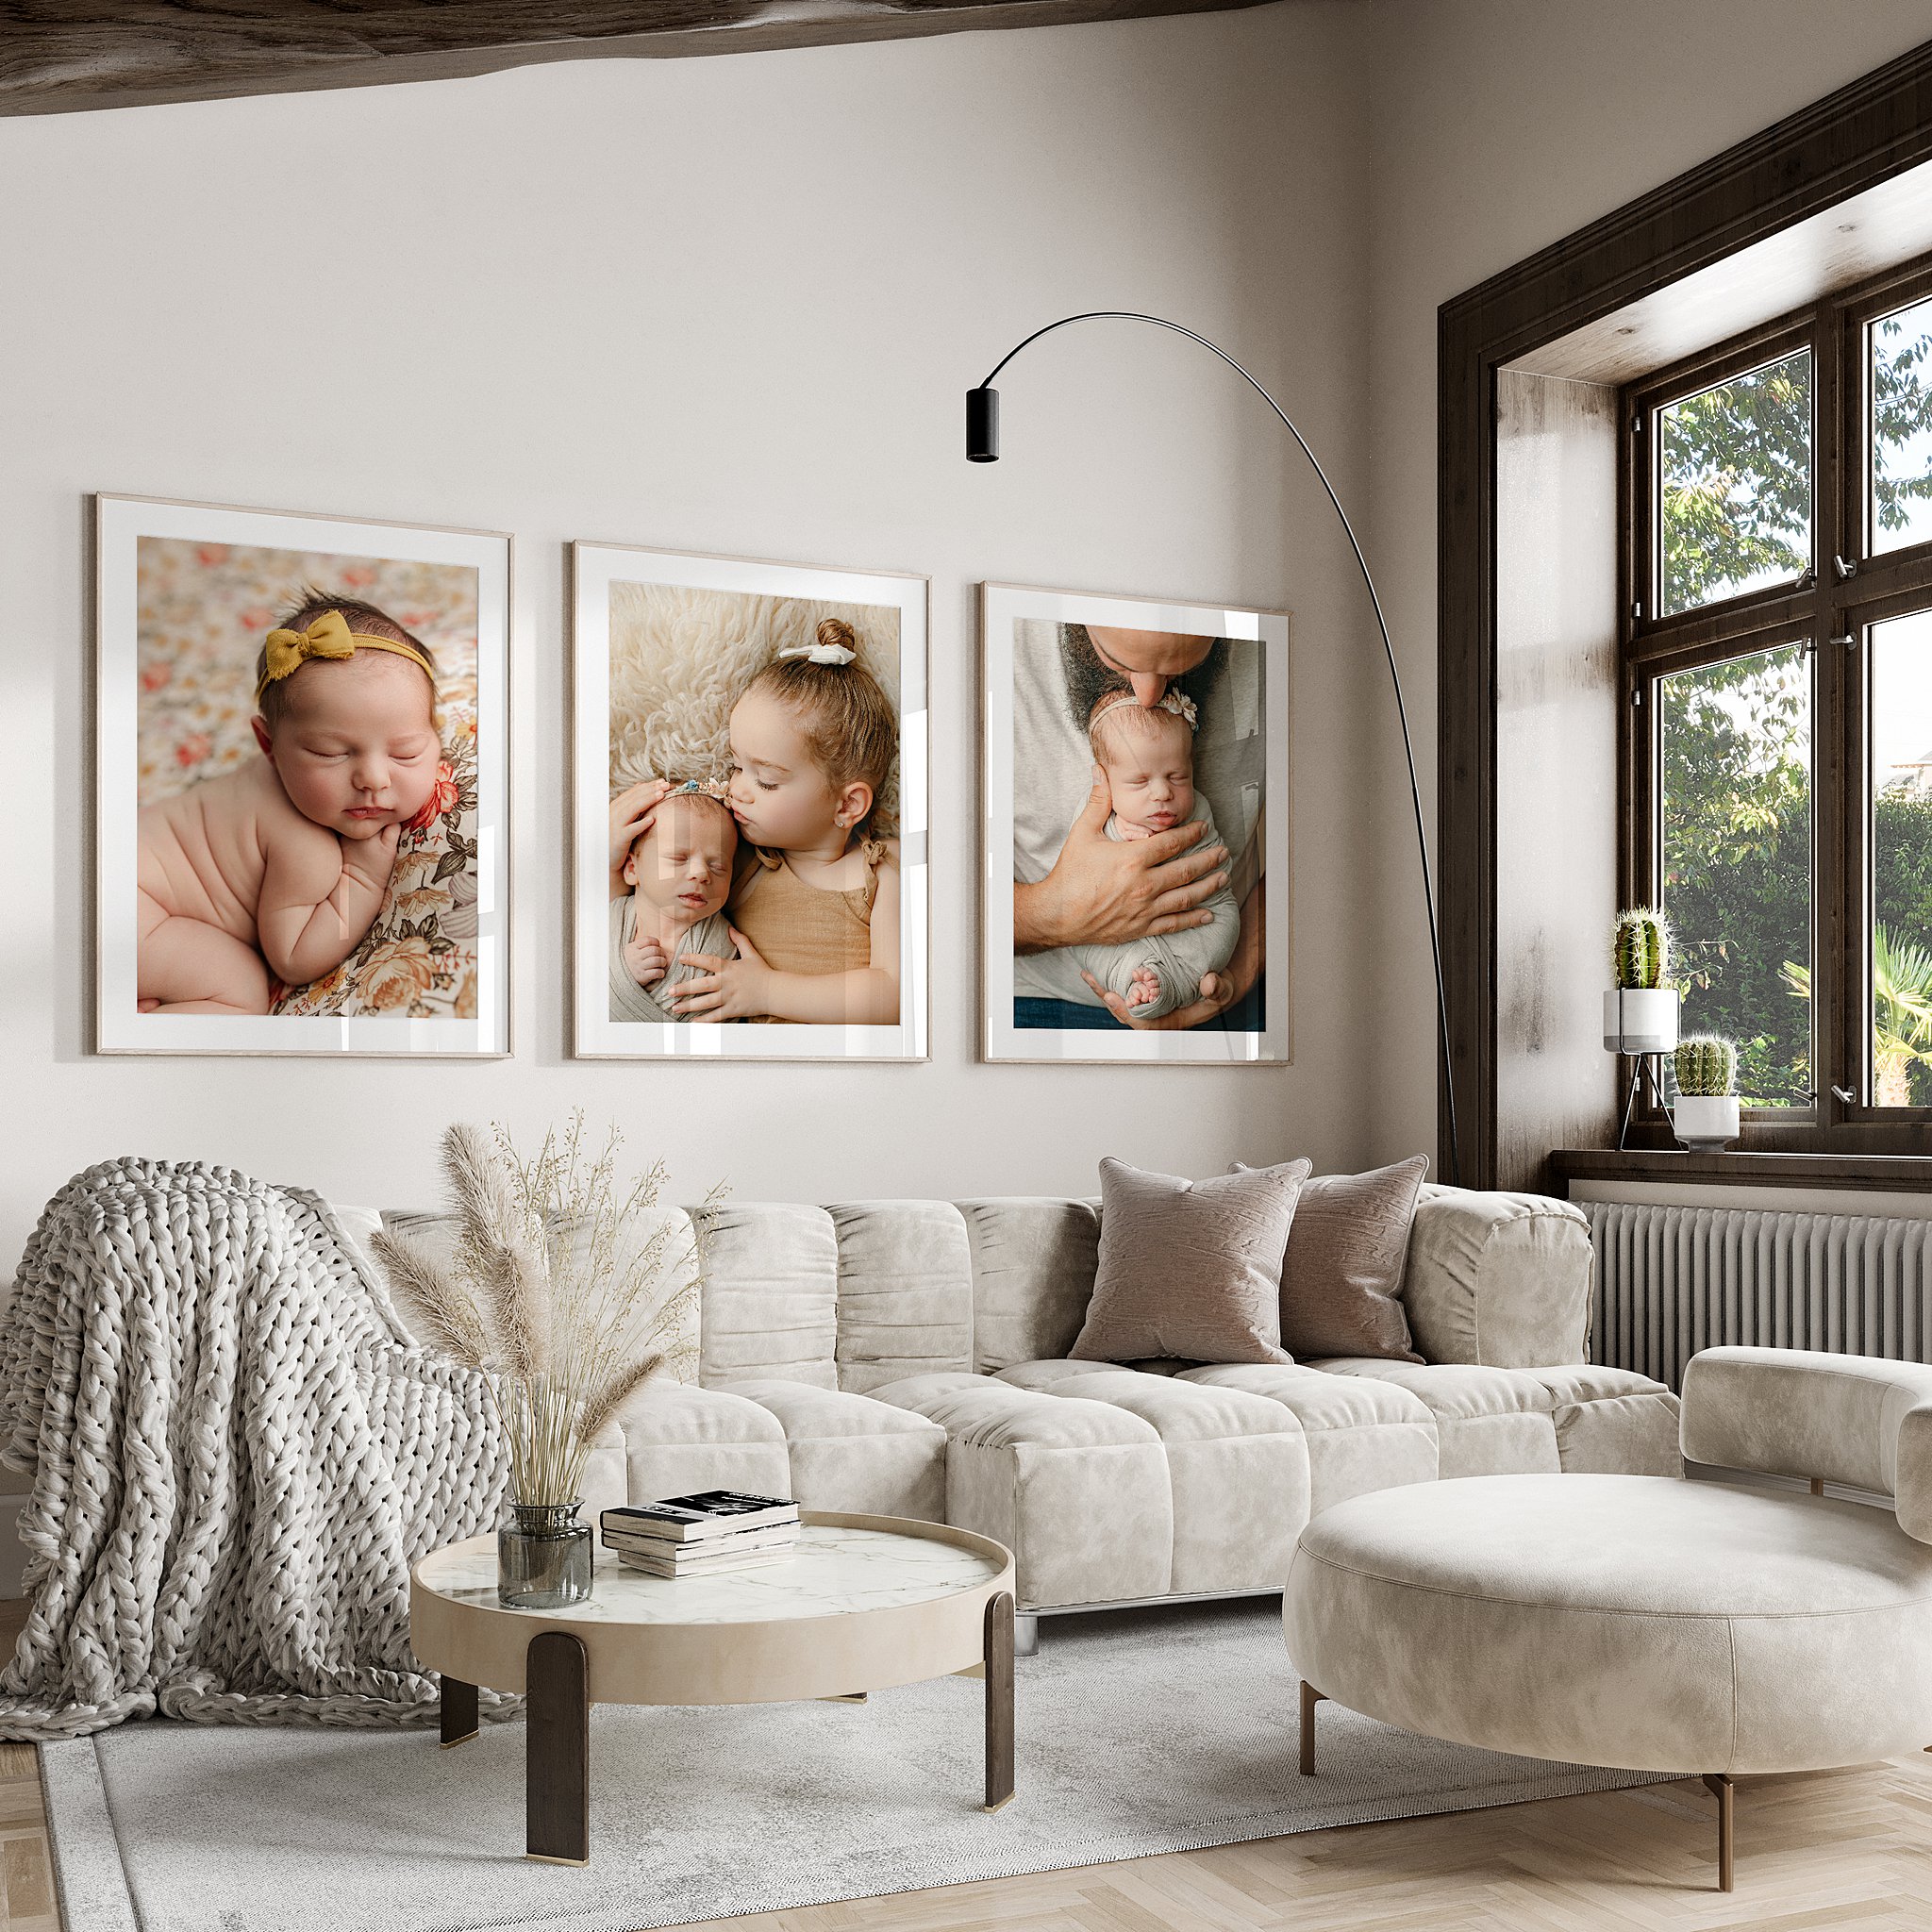 Importance of newborn photography displayed for your family to cherish in the quad cities